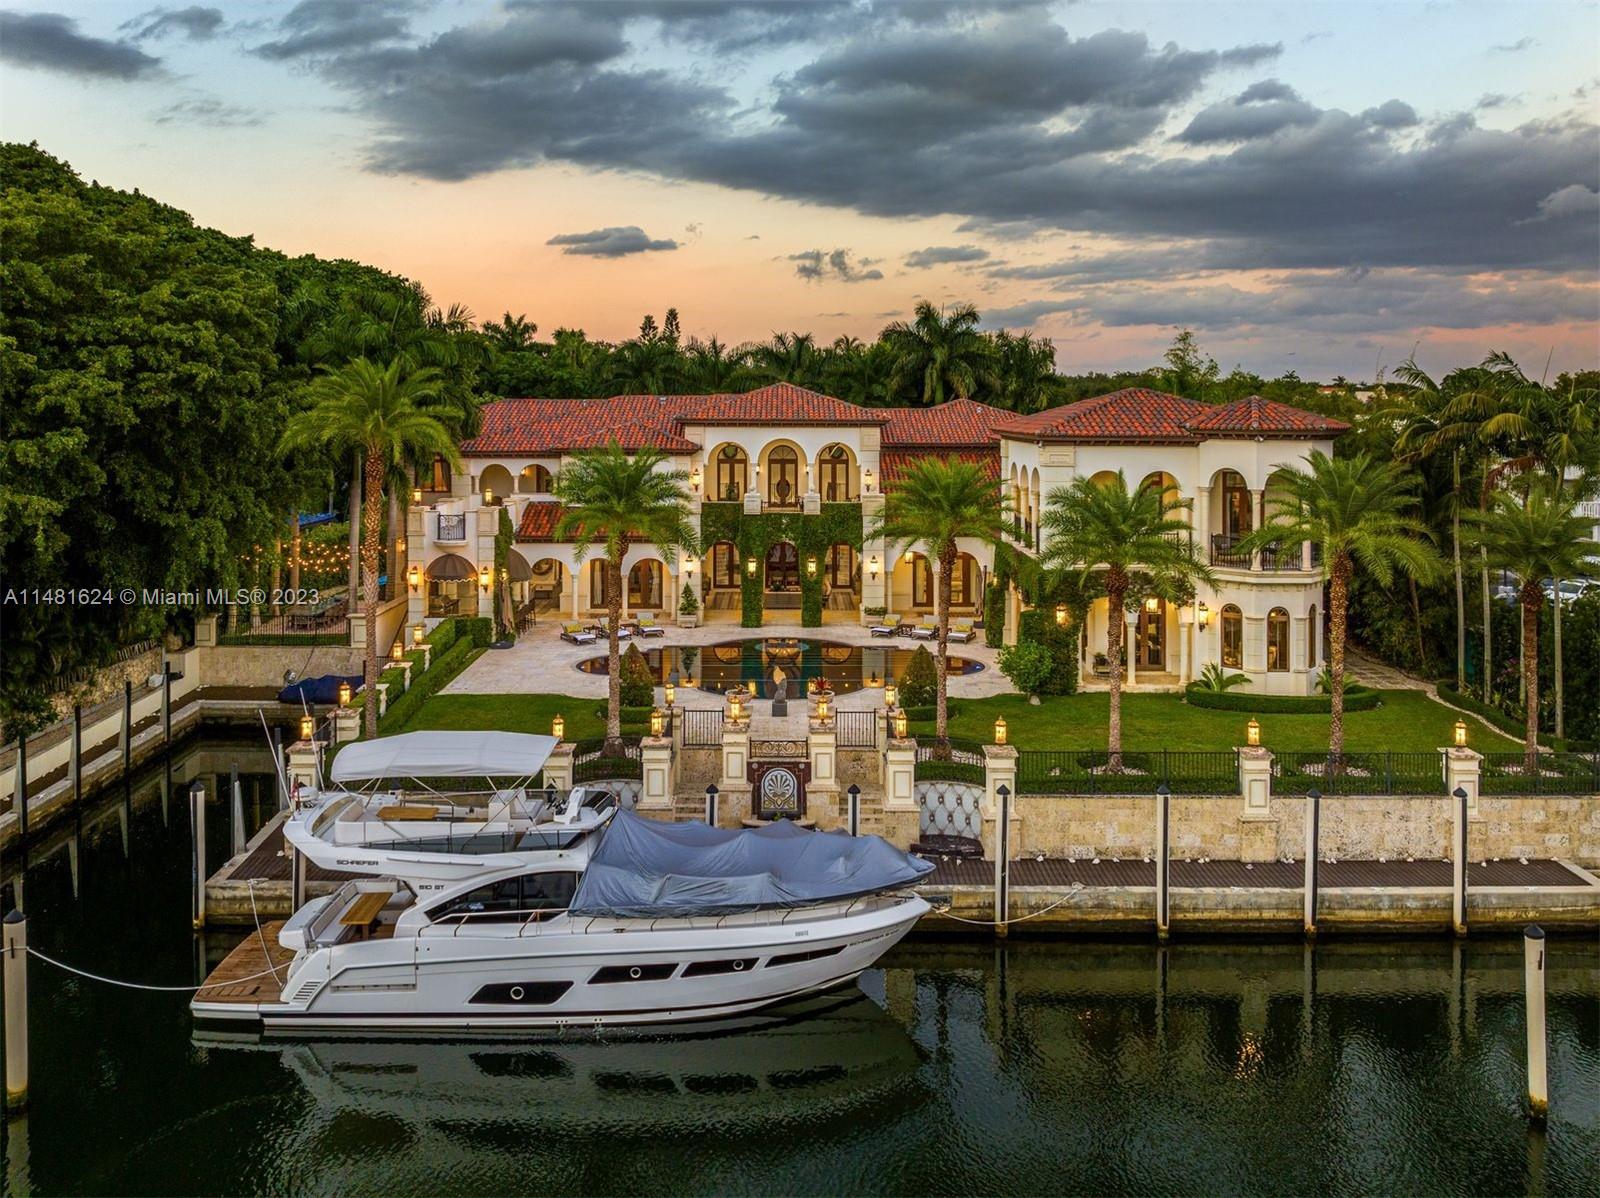 Stunning Mediterranean-style estate situated on prestigious Edgewater drive. Short commute to the Grove. Boasts 180 ft of deep-water frontage as well as a very rare 80-ft inlet slip and direct access to the bay. The home offers luxury and sophistication, showcasing 13,889 sf of living area comprised of 10 bedrooms, 11 full and 2 half baths. Privacy is paramount, enhanced by a private gated driveway leading to the garage and carports capable of accommodating 8 or more cars. Among its features are soaring ceilings, 2 Master Suites, elegant kitchen, dual staircases, 2 separate maid's quarters, office, and 2 elevators. Multiple expansive terraces overlook the expansive backyard with a beautiful pool, and impressive outdoor kitchen—a perfect setting for both relaxation and entertainment.